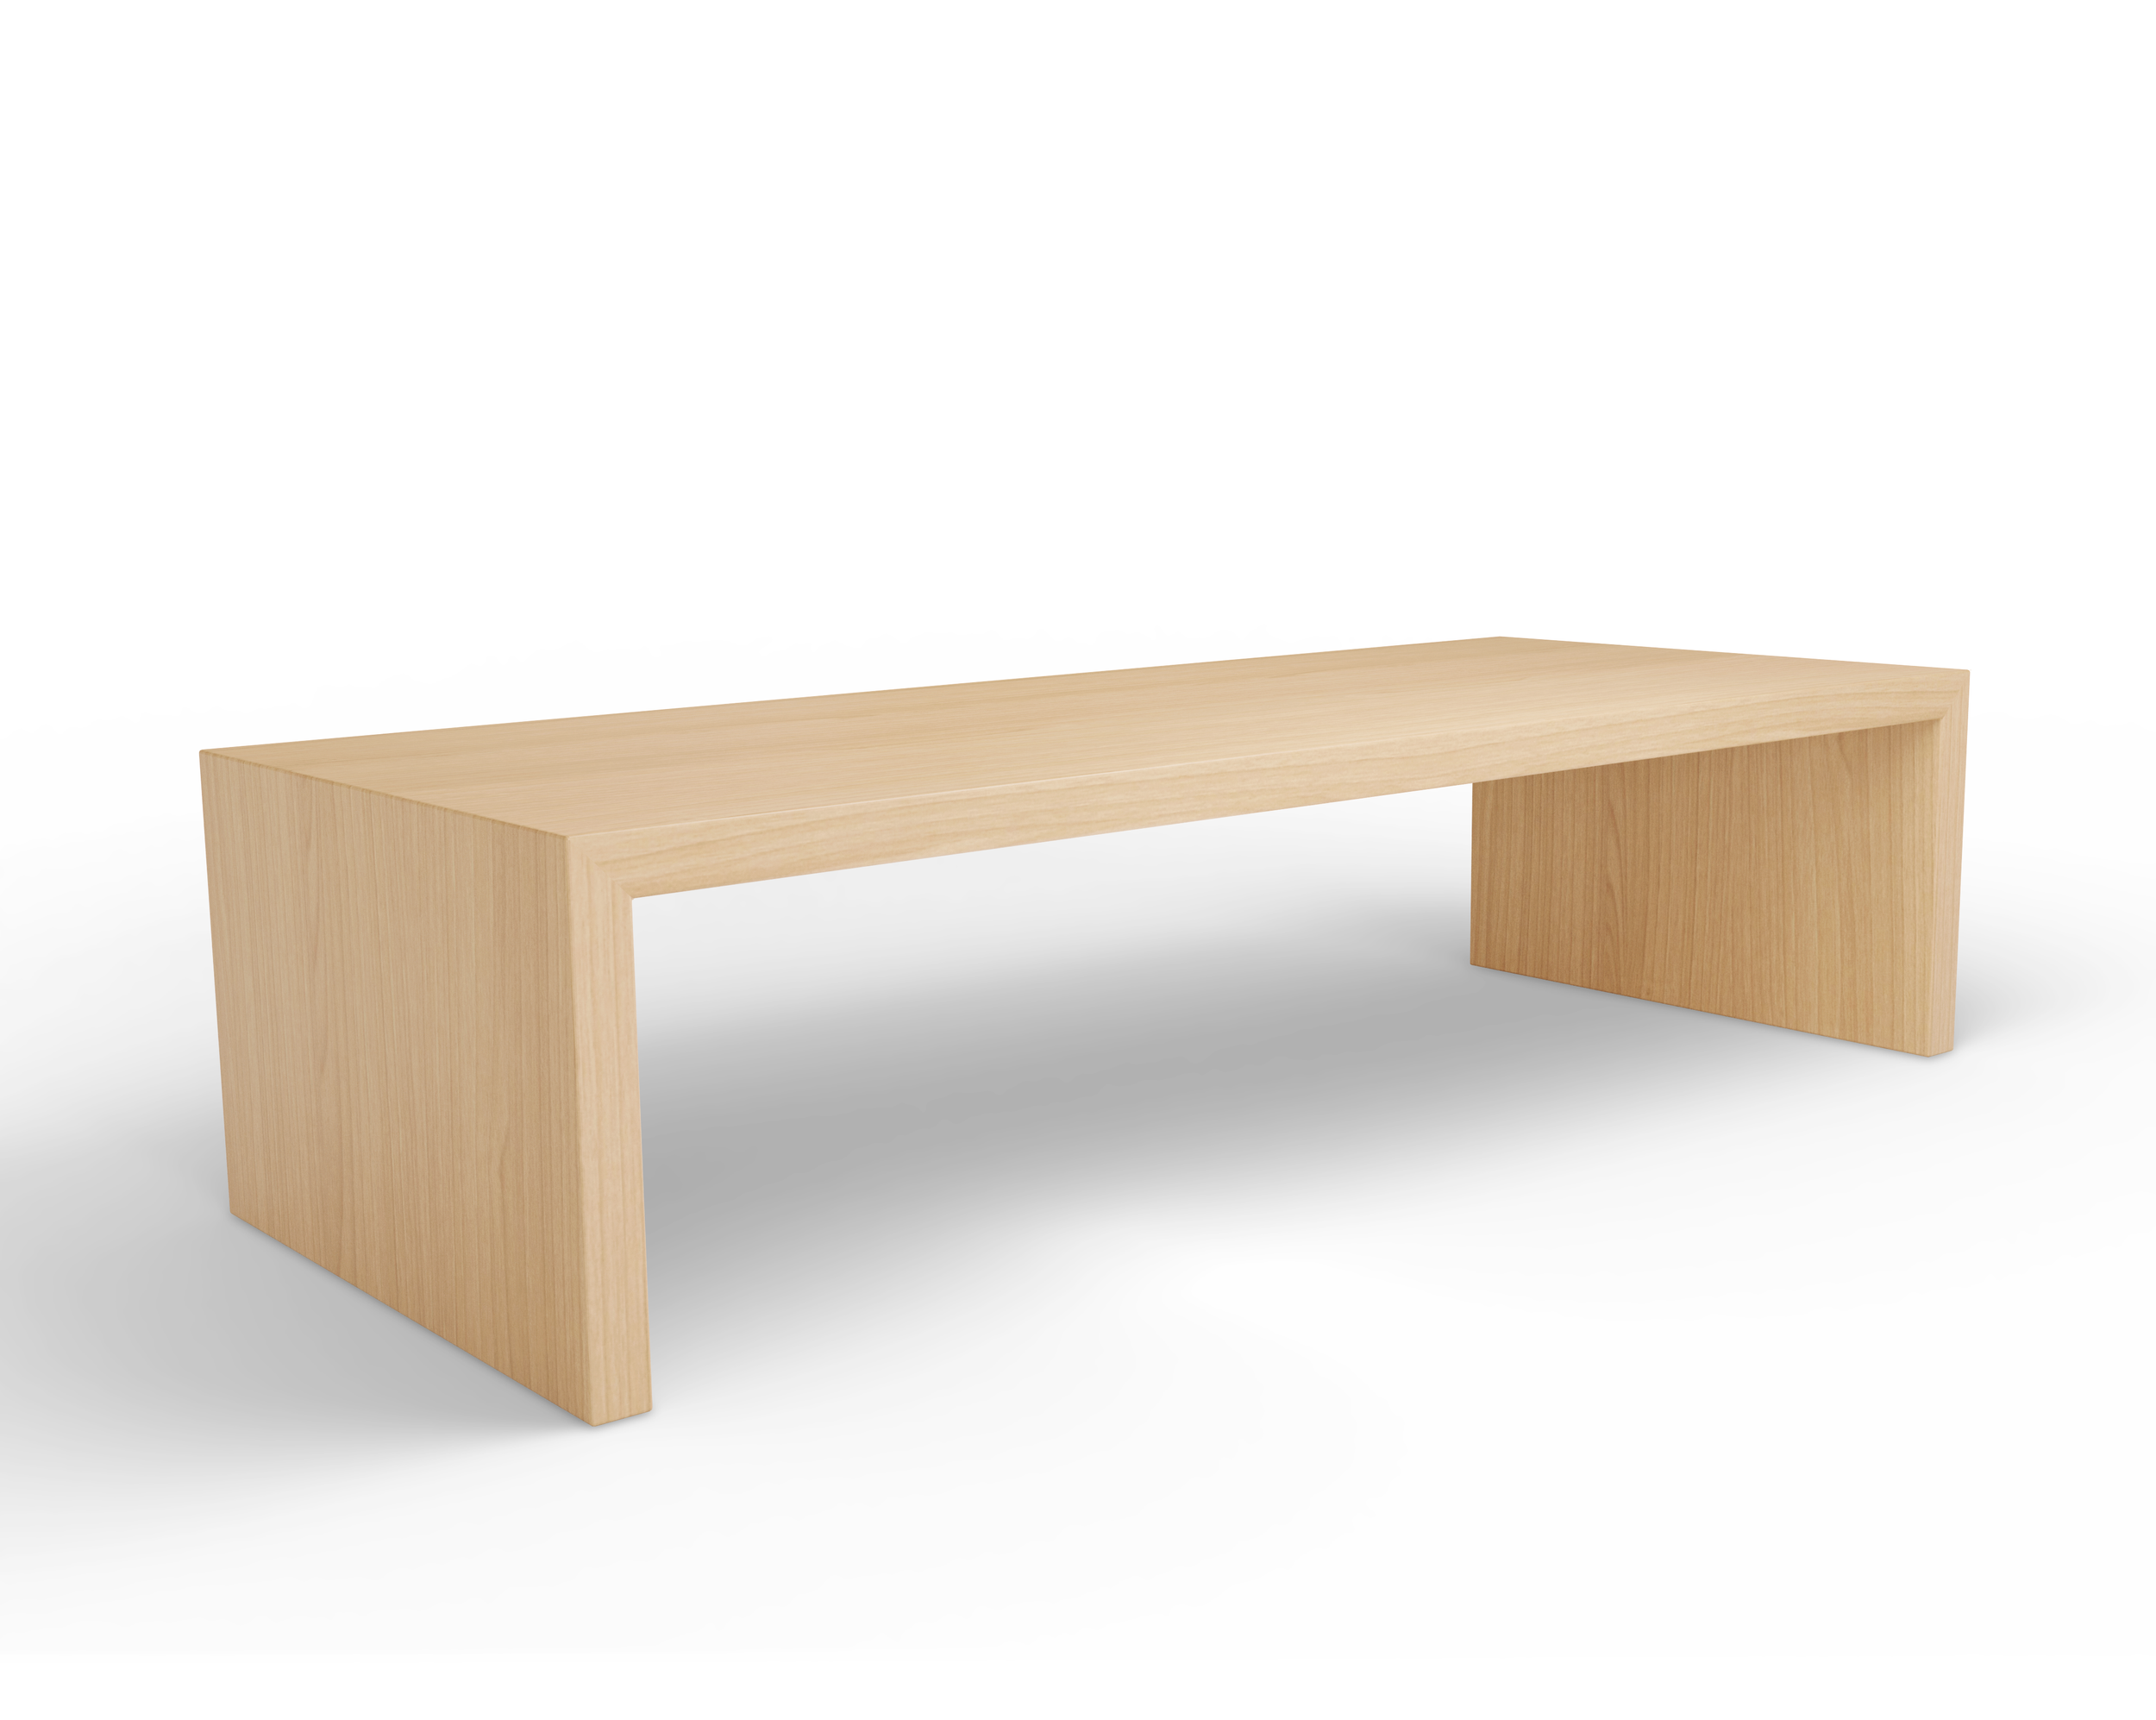 ISAAK TABLE